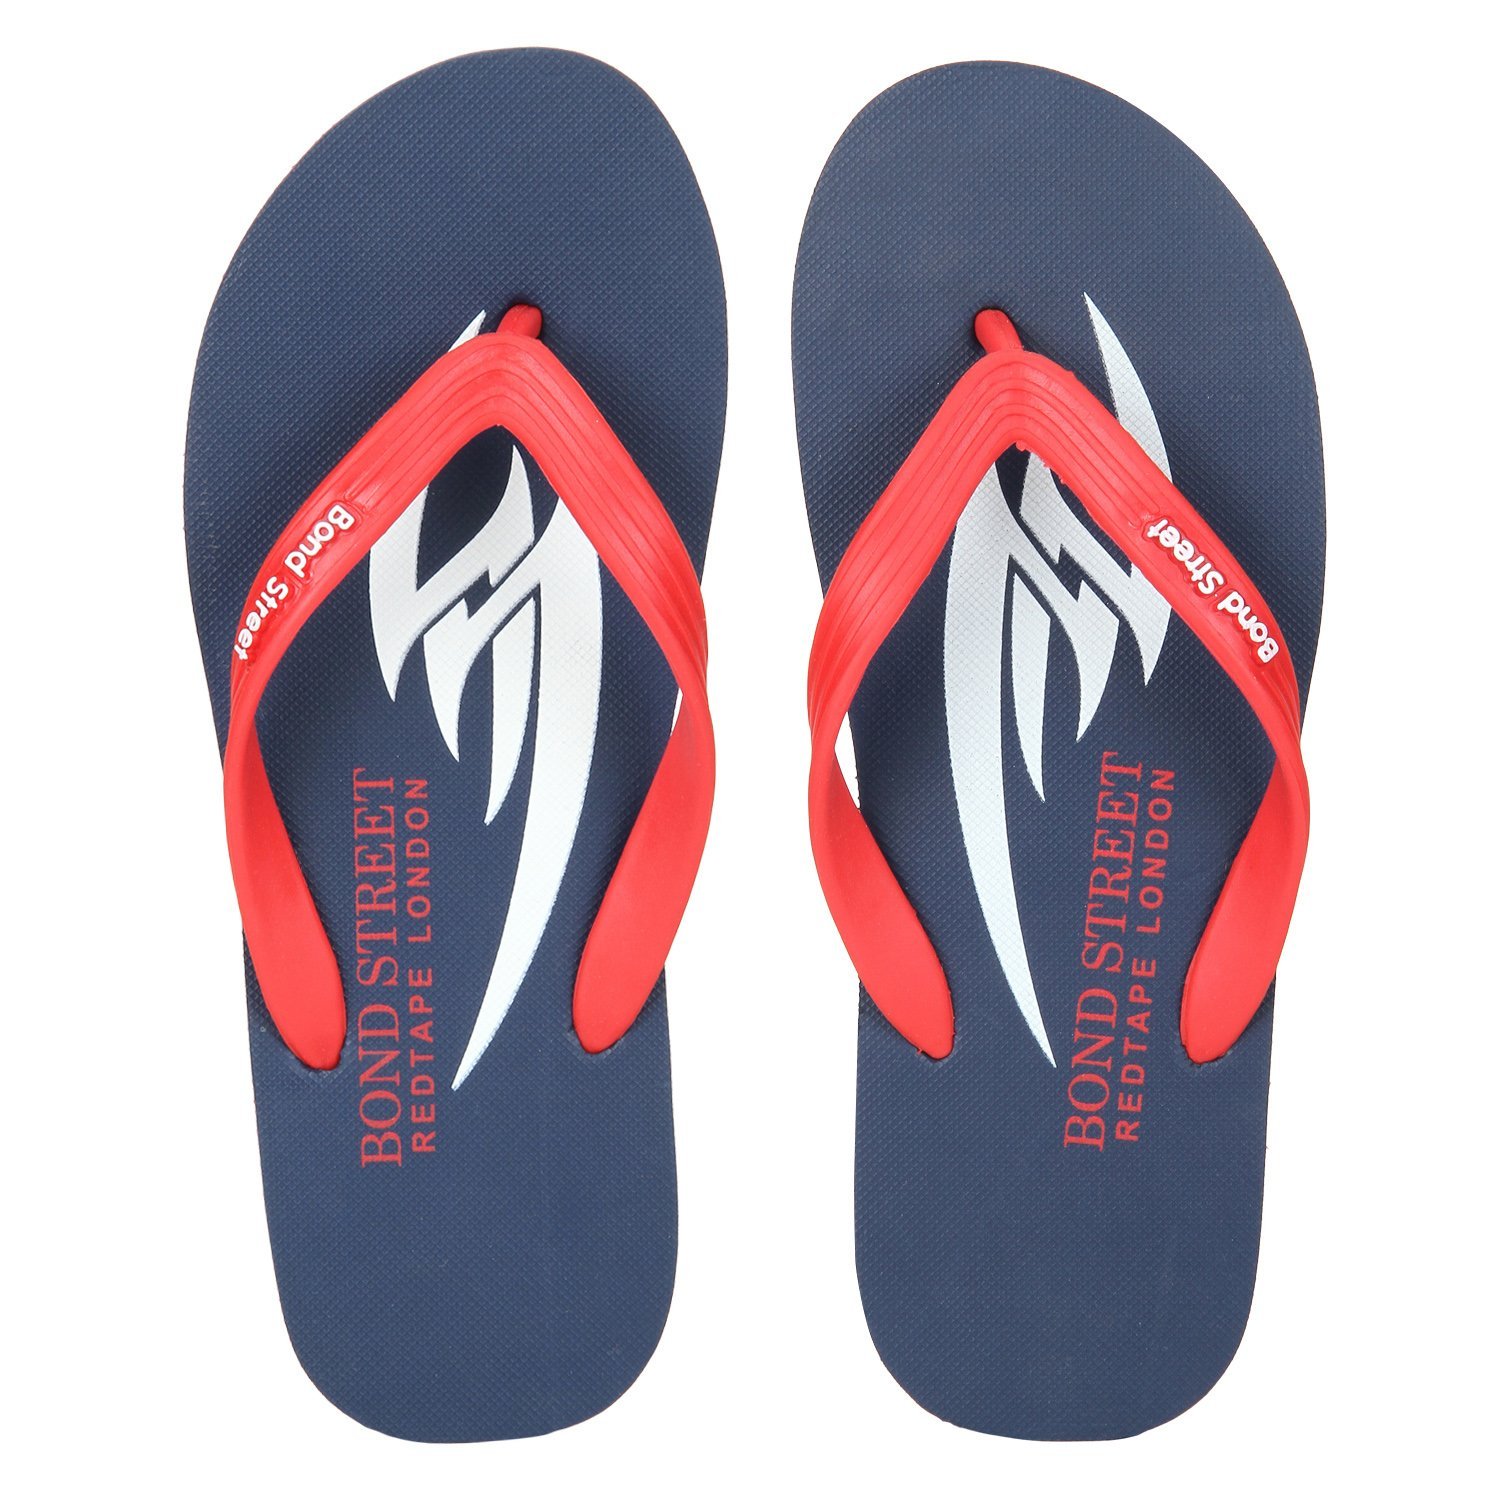 Amazon - Buy Branded Flip Flops at Minimum 75% off Starting from Rs. 68